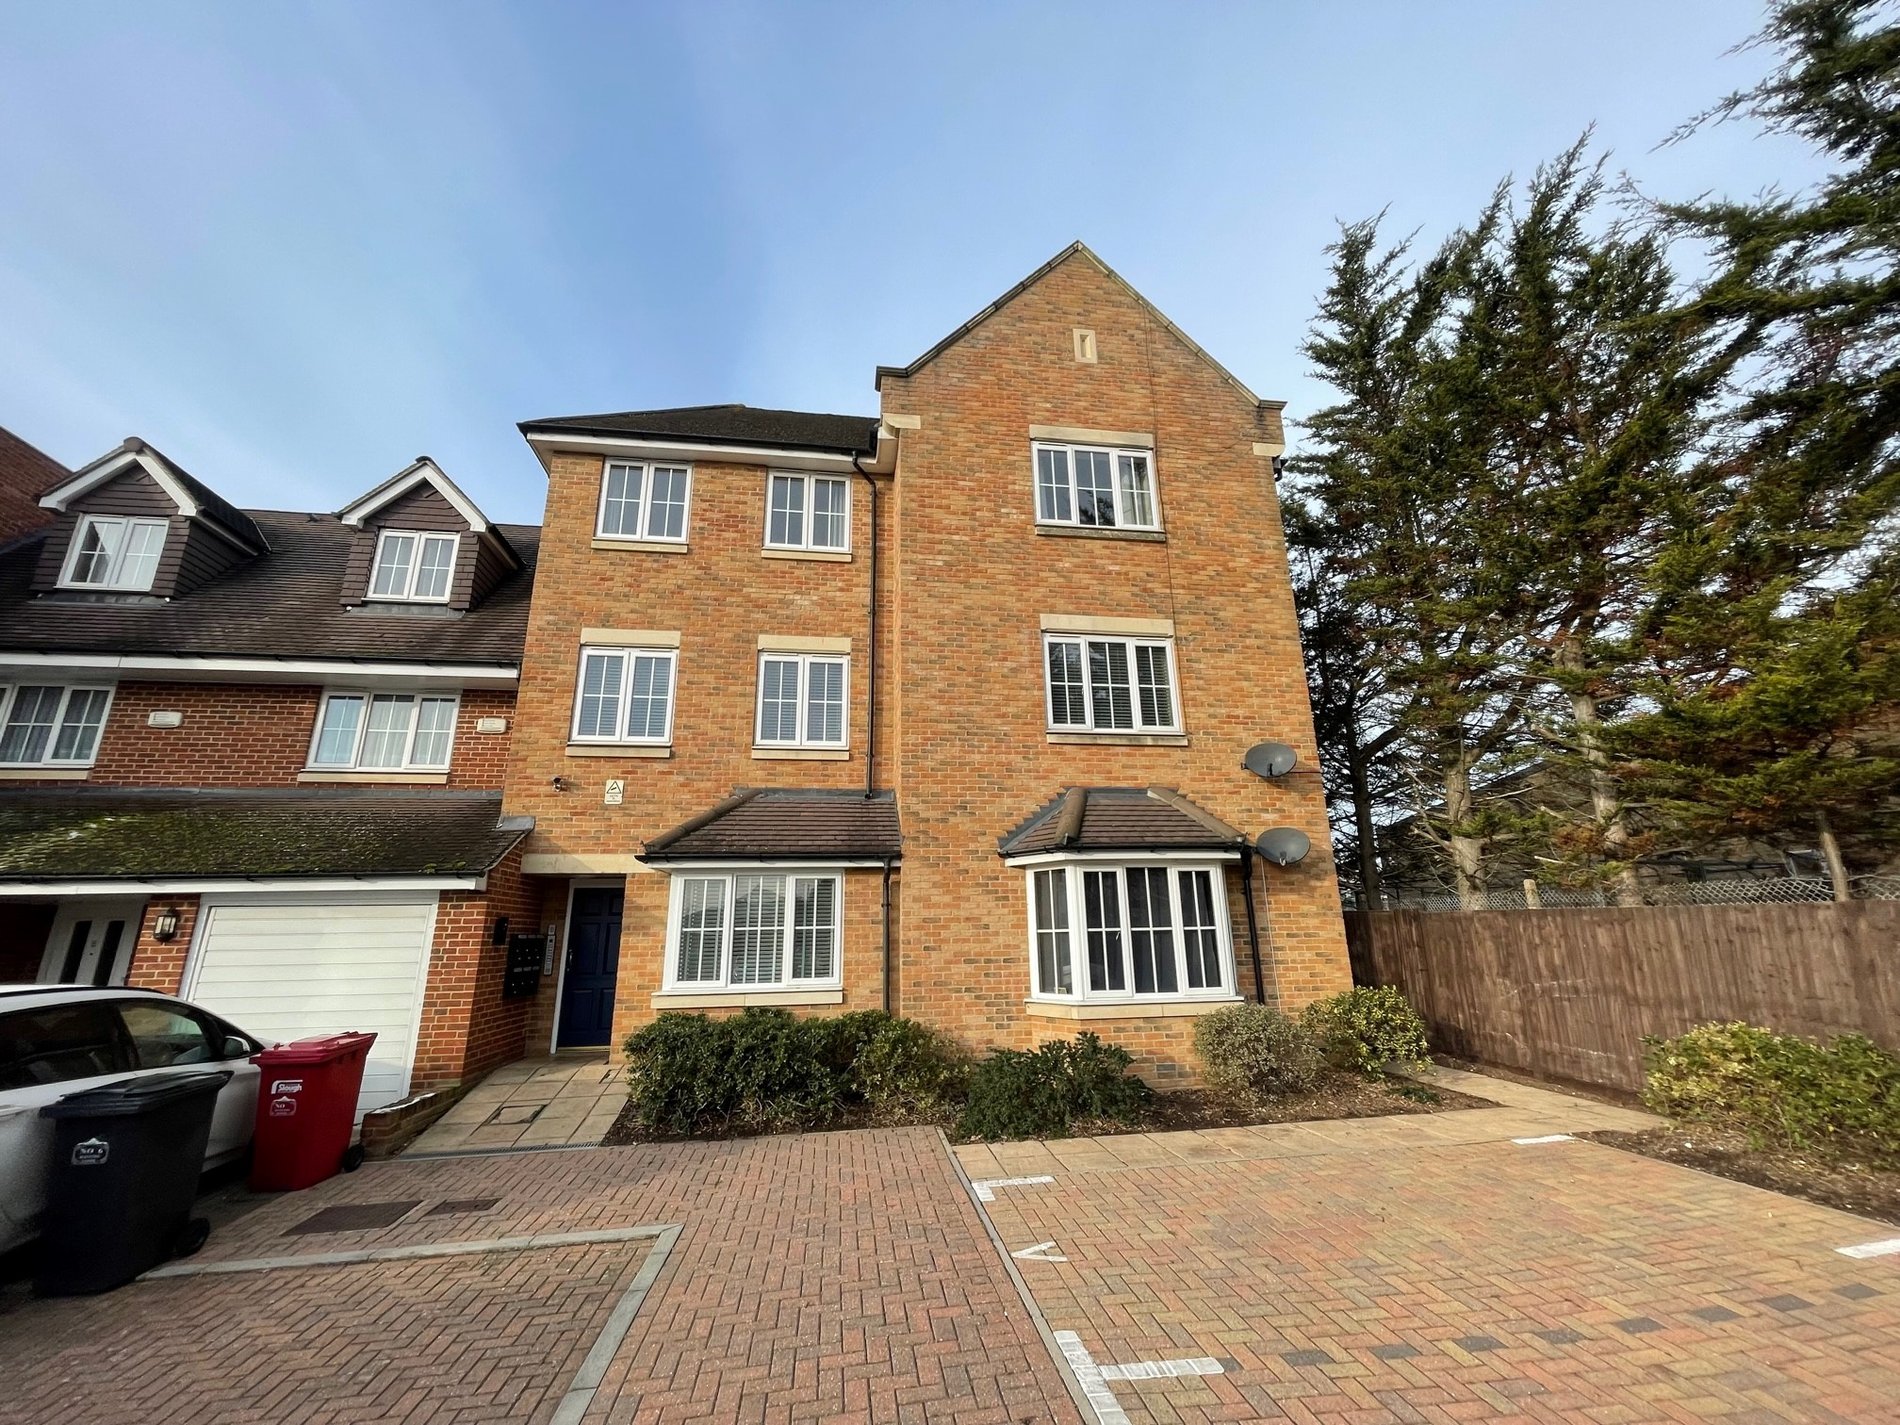 2 bed flat for sale in Hayling Close, Cippenham - Property Image 1